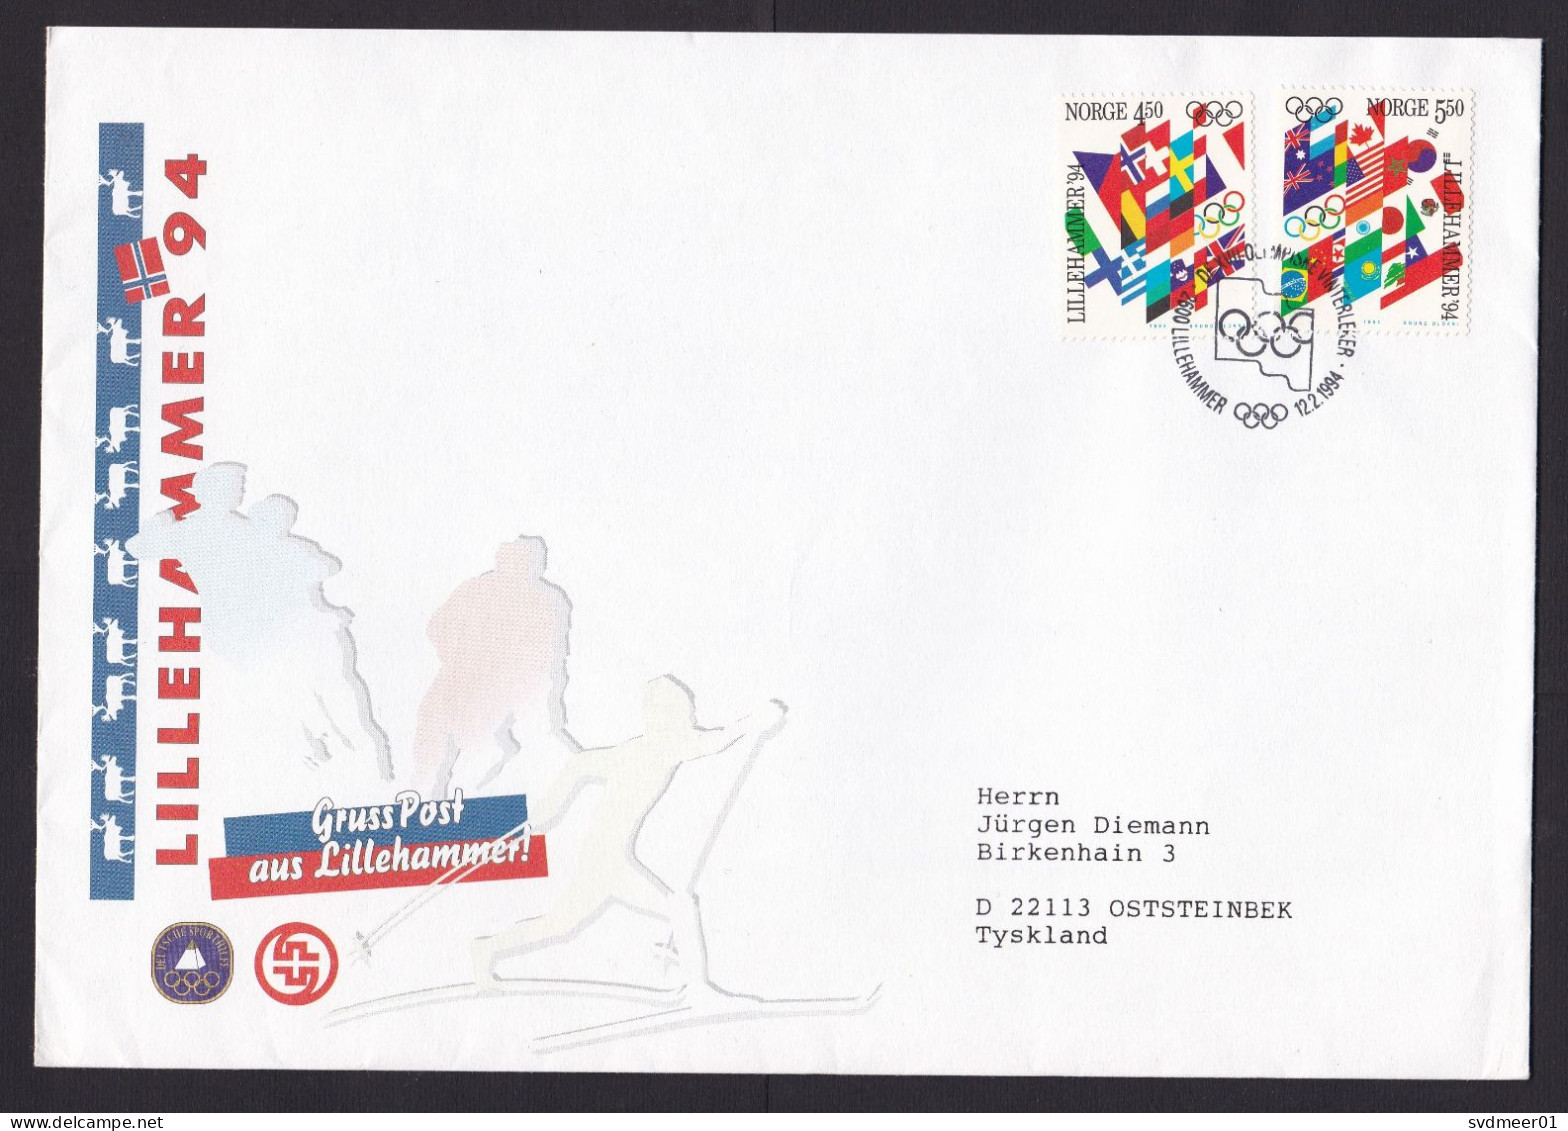 Norway: Cover To Gerrmany, 1994, 2 Stamps, Olympics Lillehammer, Picture Cards German Sporters Enclosed (traces Of Use) - Brieven En Documenten